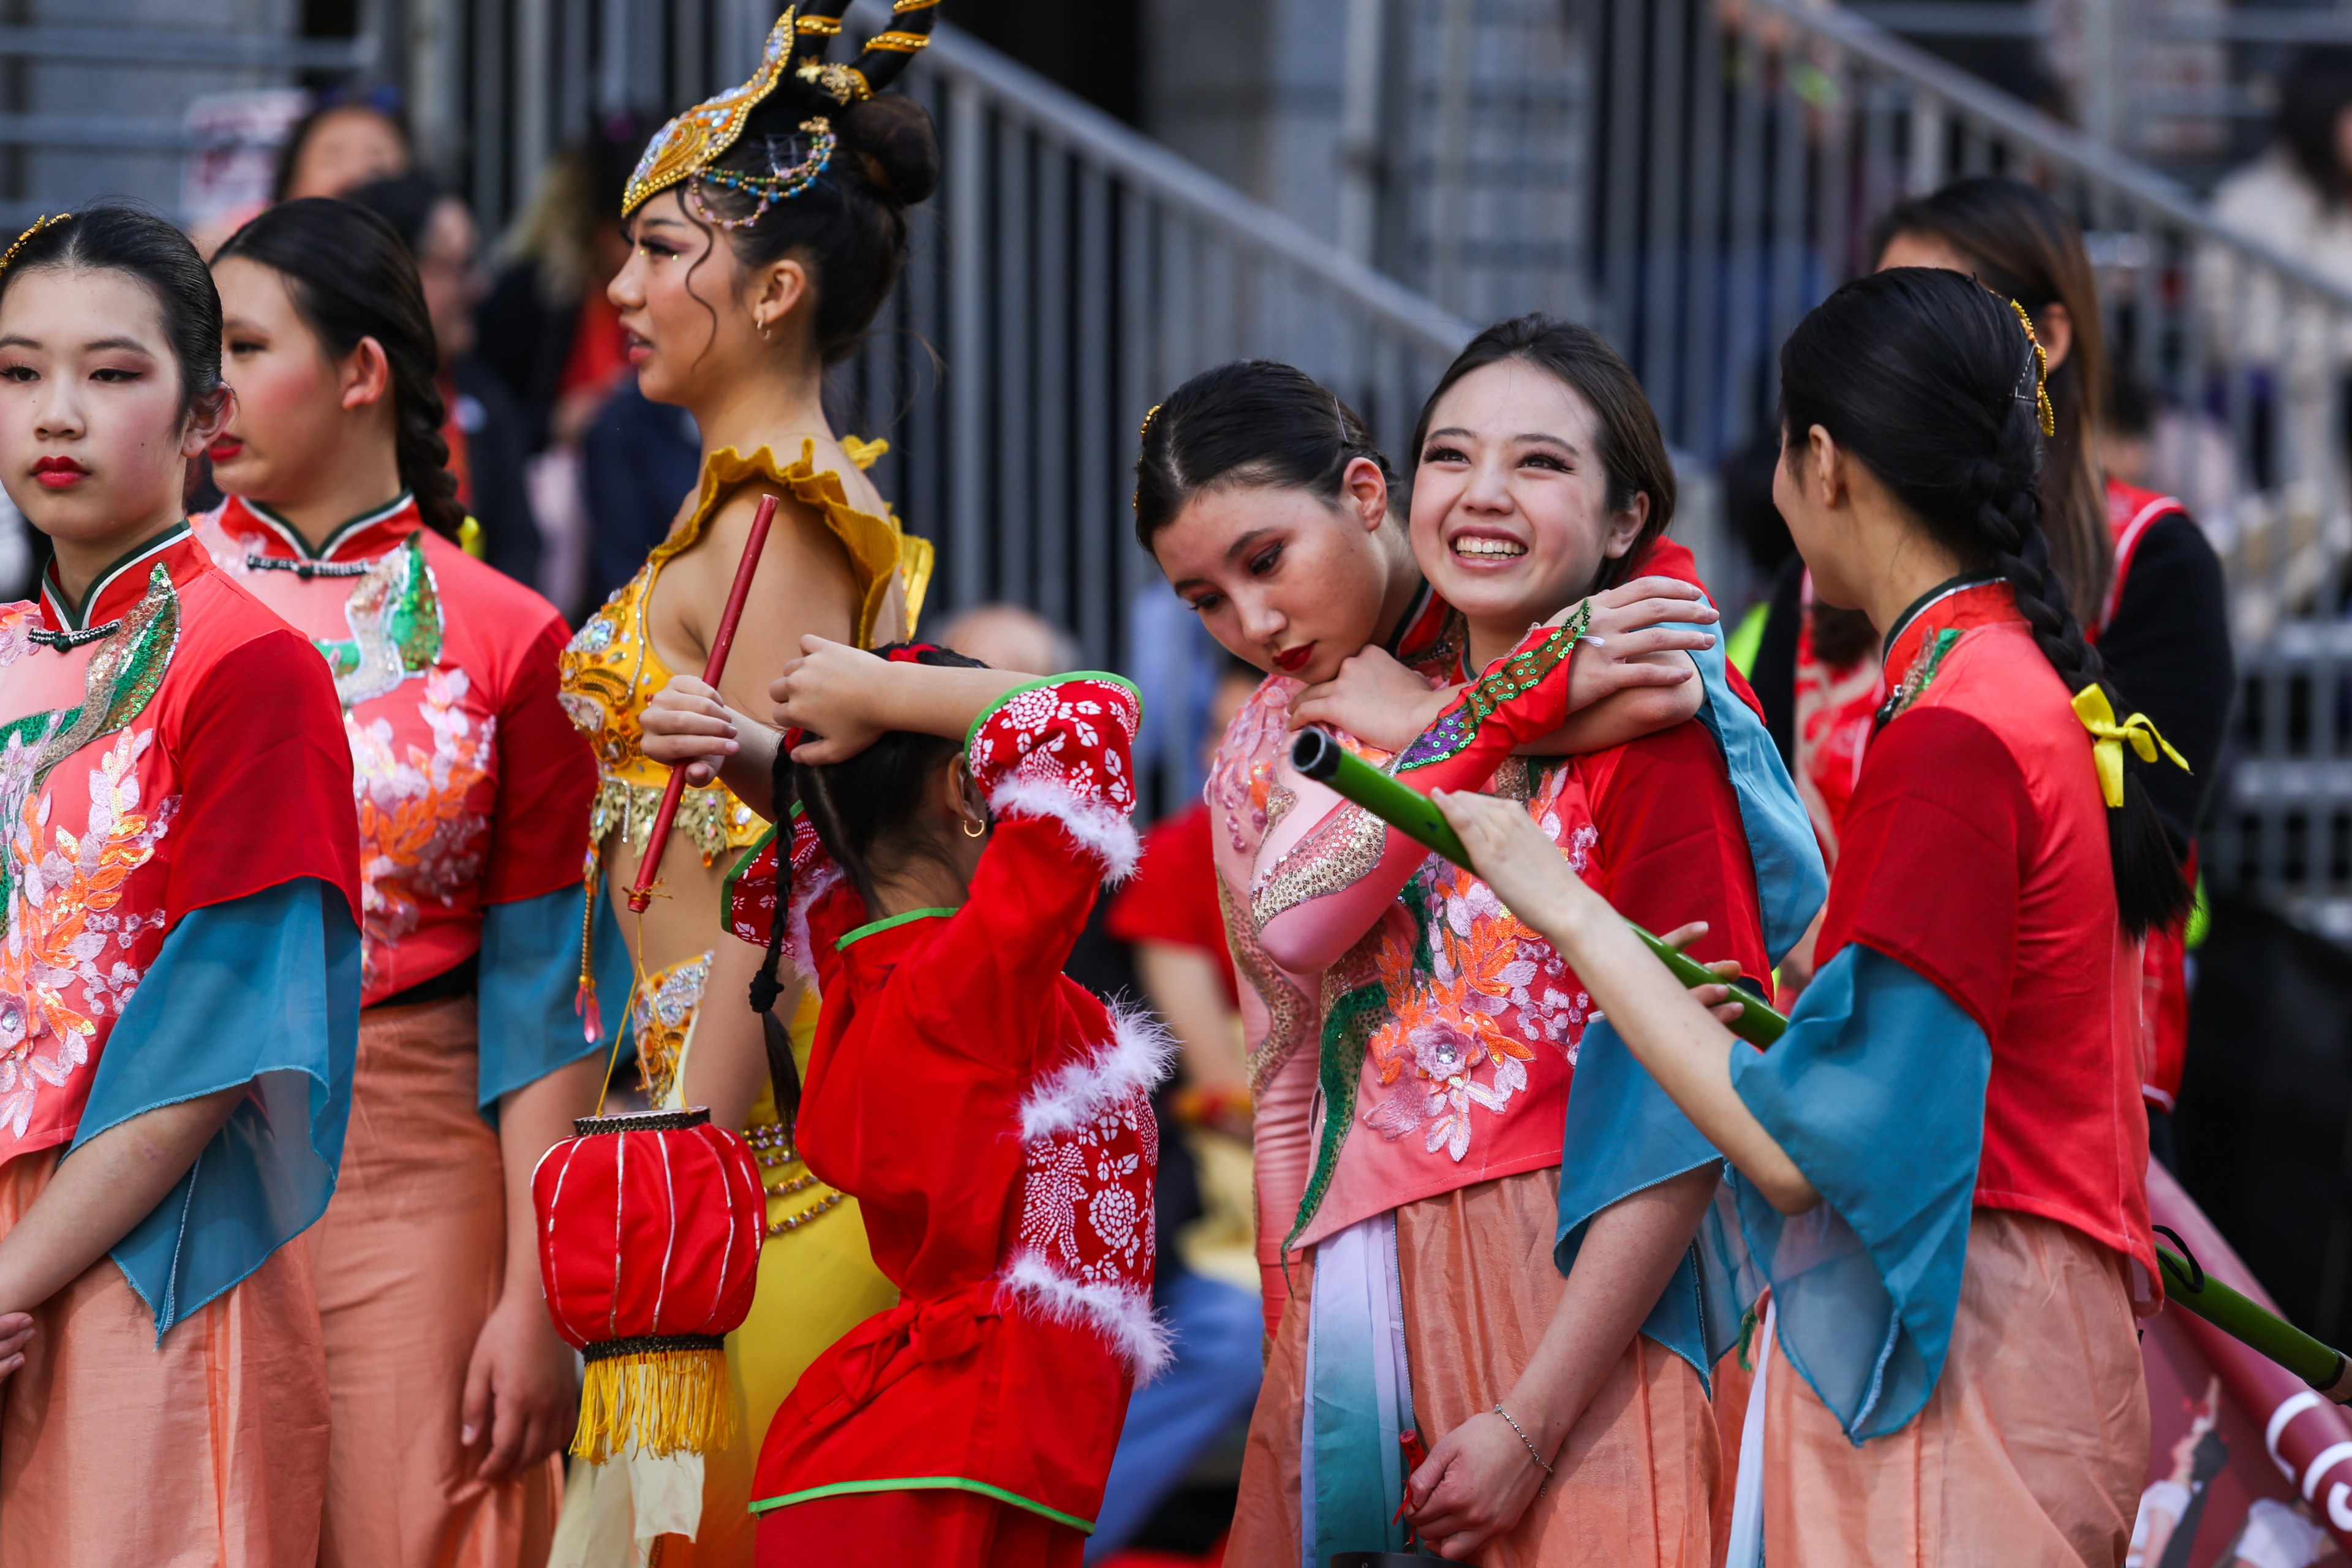 Group of people in colorful traditional Asian attire, smiling and interacting with each other, some holding props.